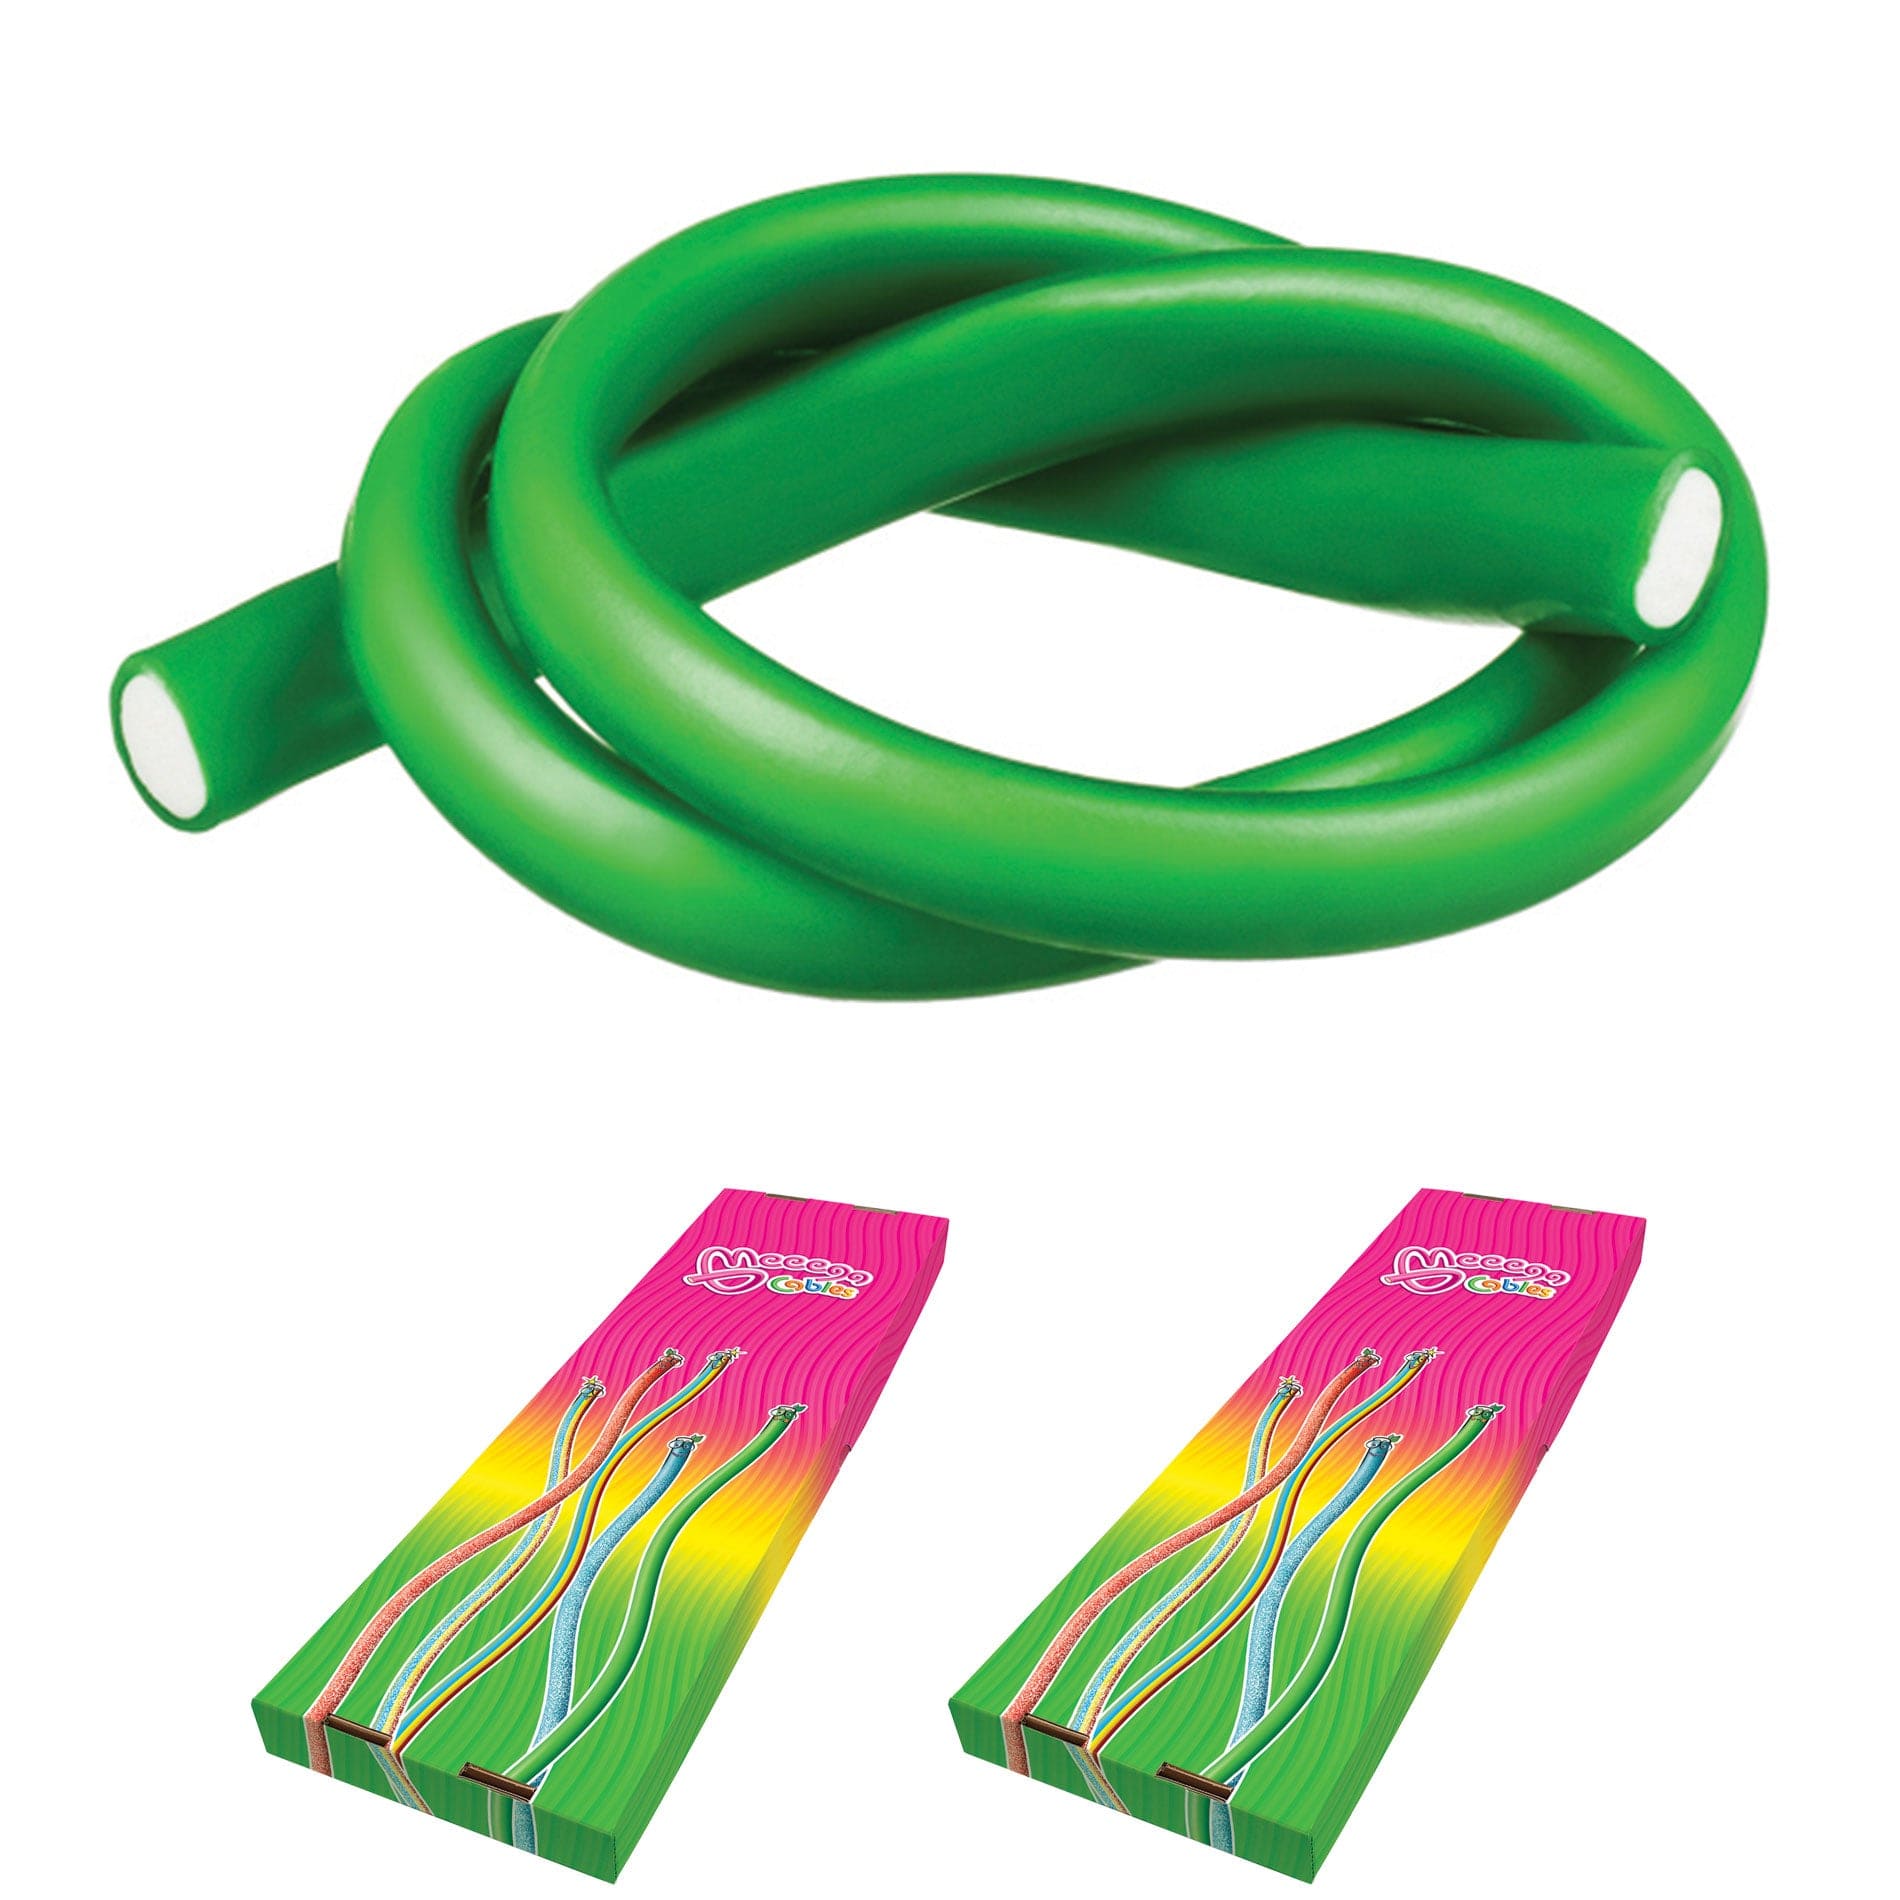 Novelty Concessions Gummy Rope APPLE / 2 Pack (60 pieces) Meeega Cables European Chewy Rope Candy - Box of 30 individually wrapped Meeega Cables, each over 2-feet long cups with lids and straws